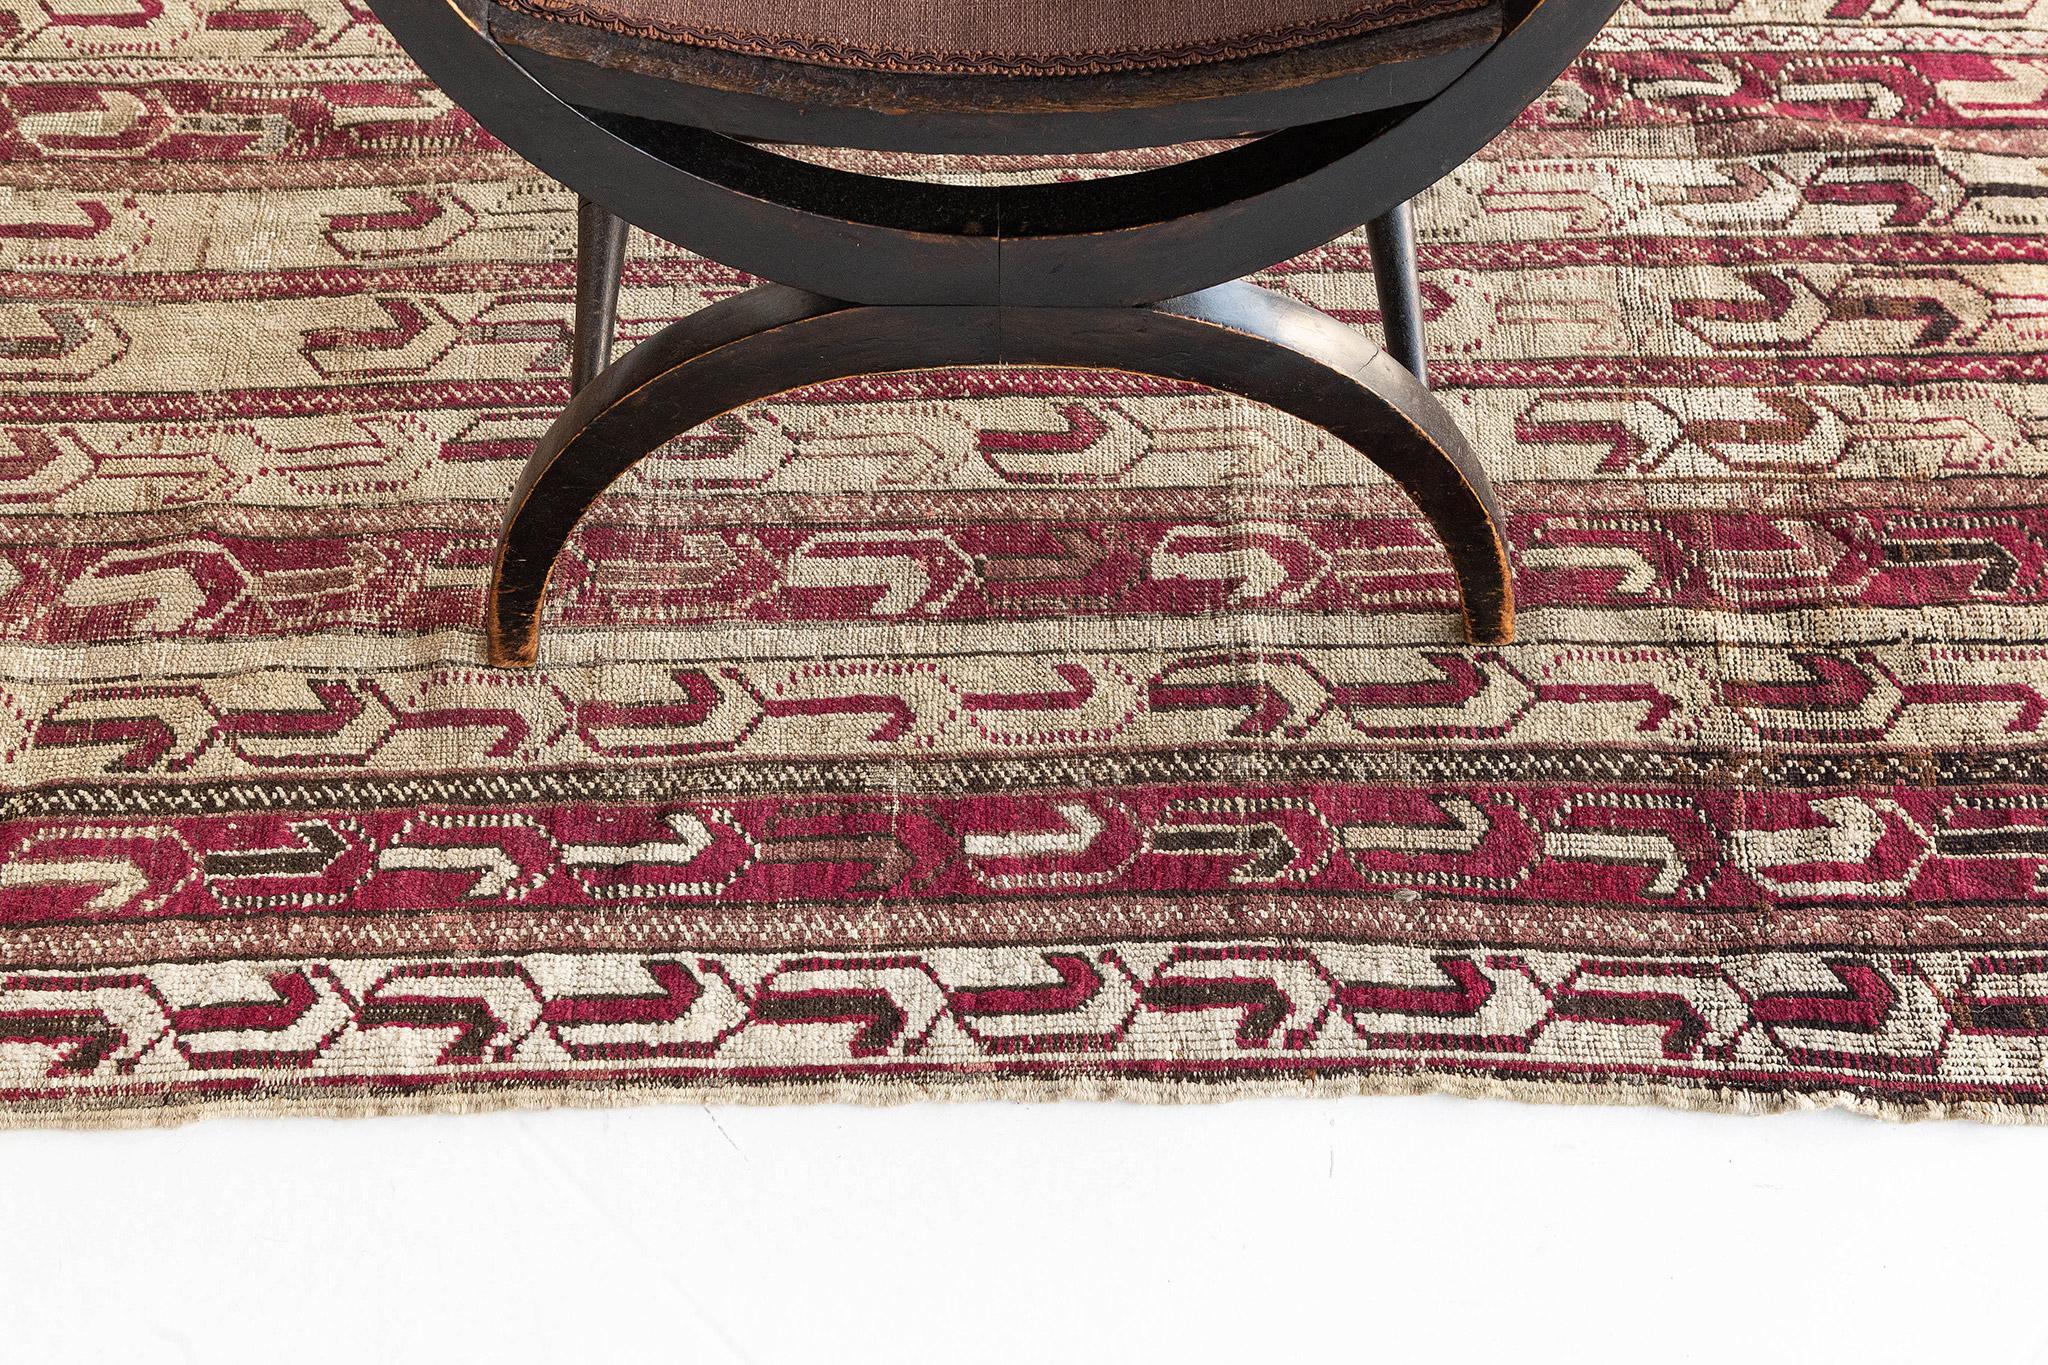 Providing elements of comfort, this Antique Turkish Anatolian rnner features an all-over ornate linear pattern accentuated with ambiguous compositions. Exuding its hygge vibes, displays the all-over vibrant toned repetitive symetrical shapes forming